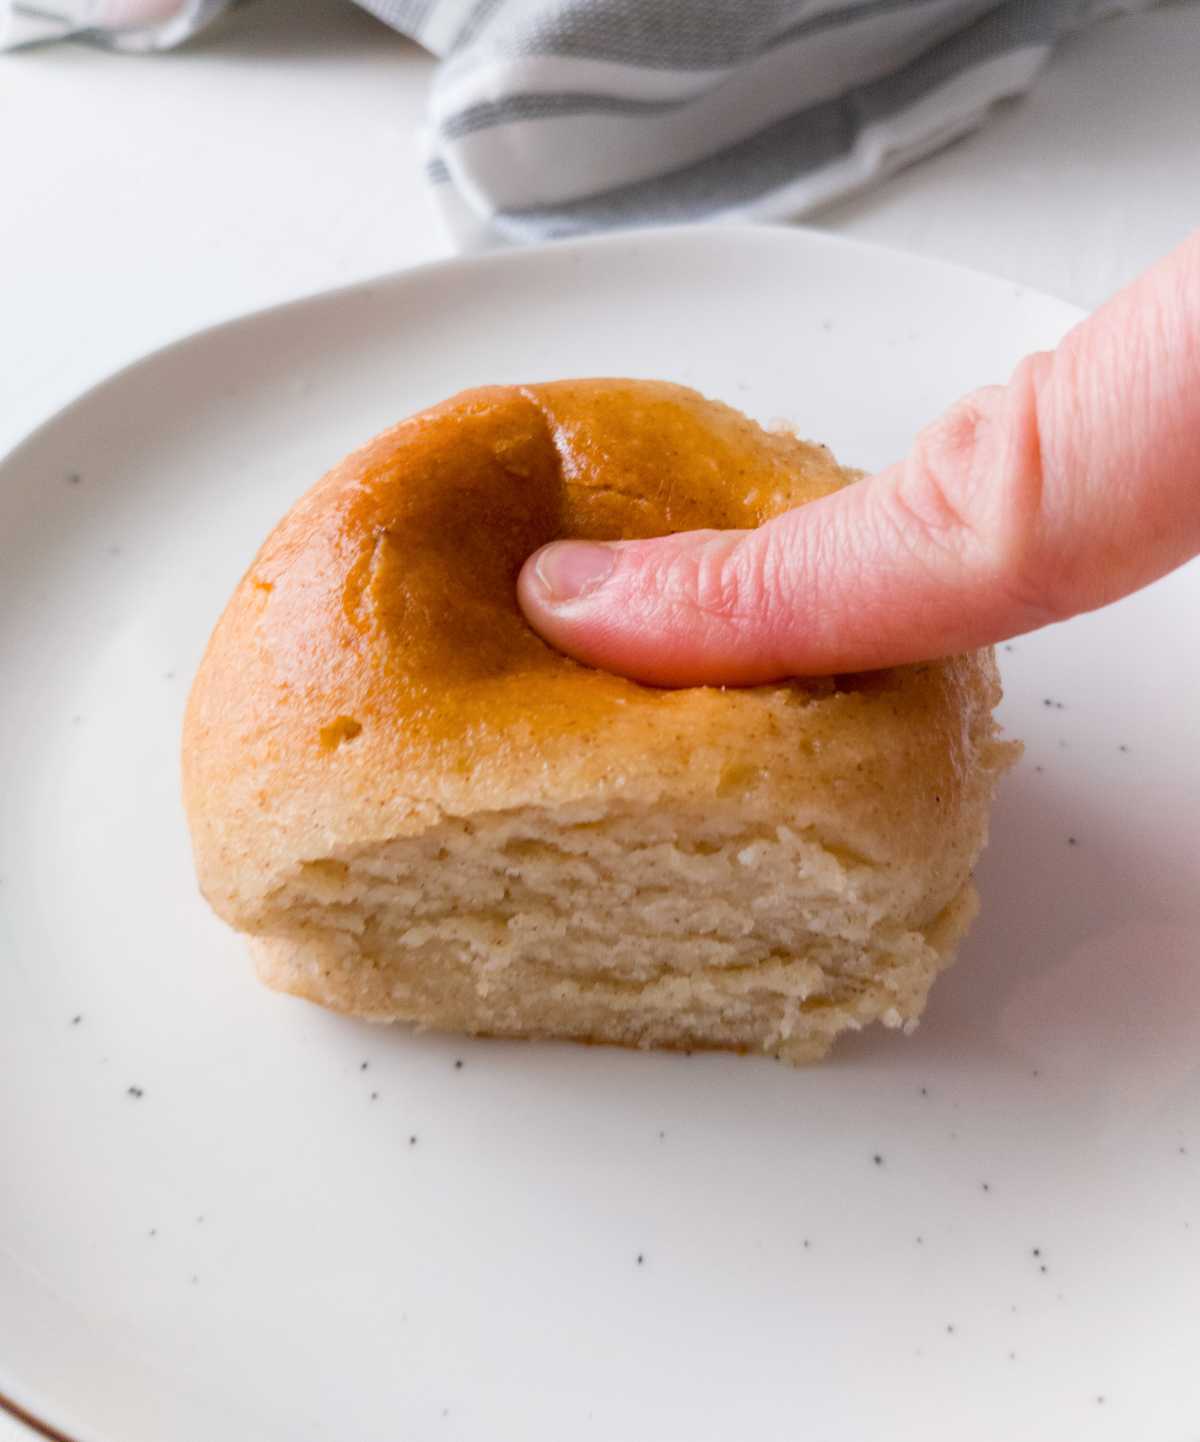 Pressing down a dinner roll with a finger.